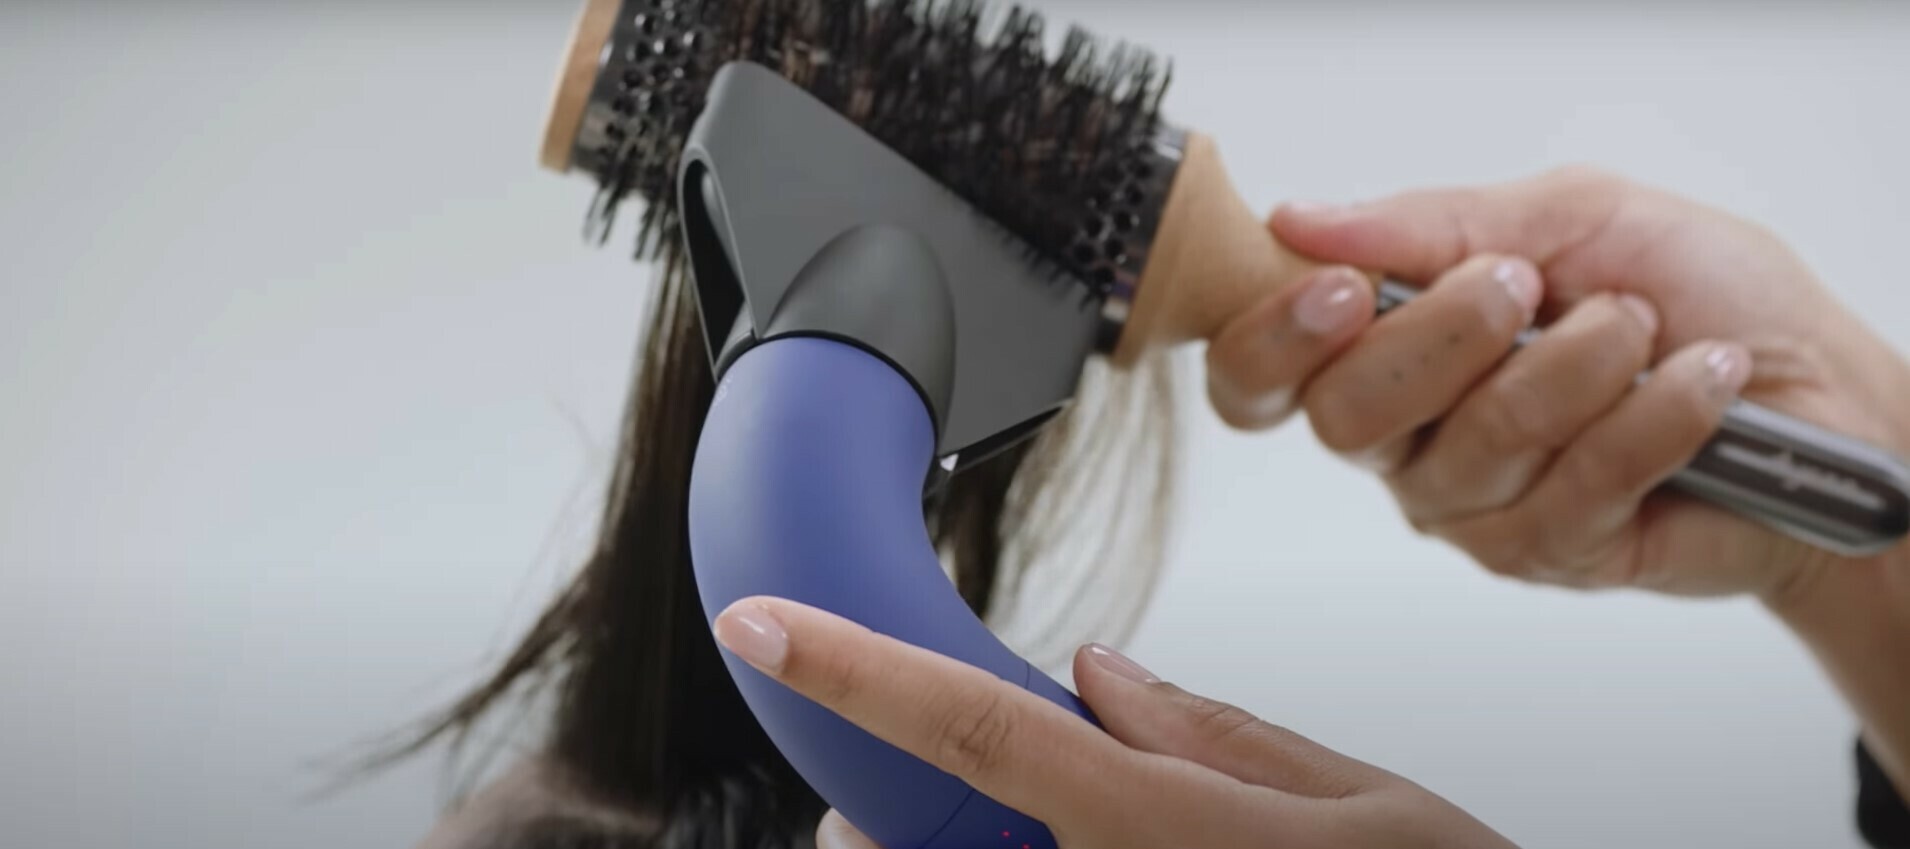 Now available for professional stylists: the Dyson Supersonic r™ Professional hair dryer